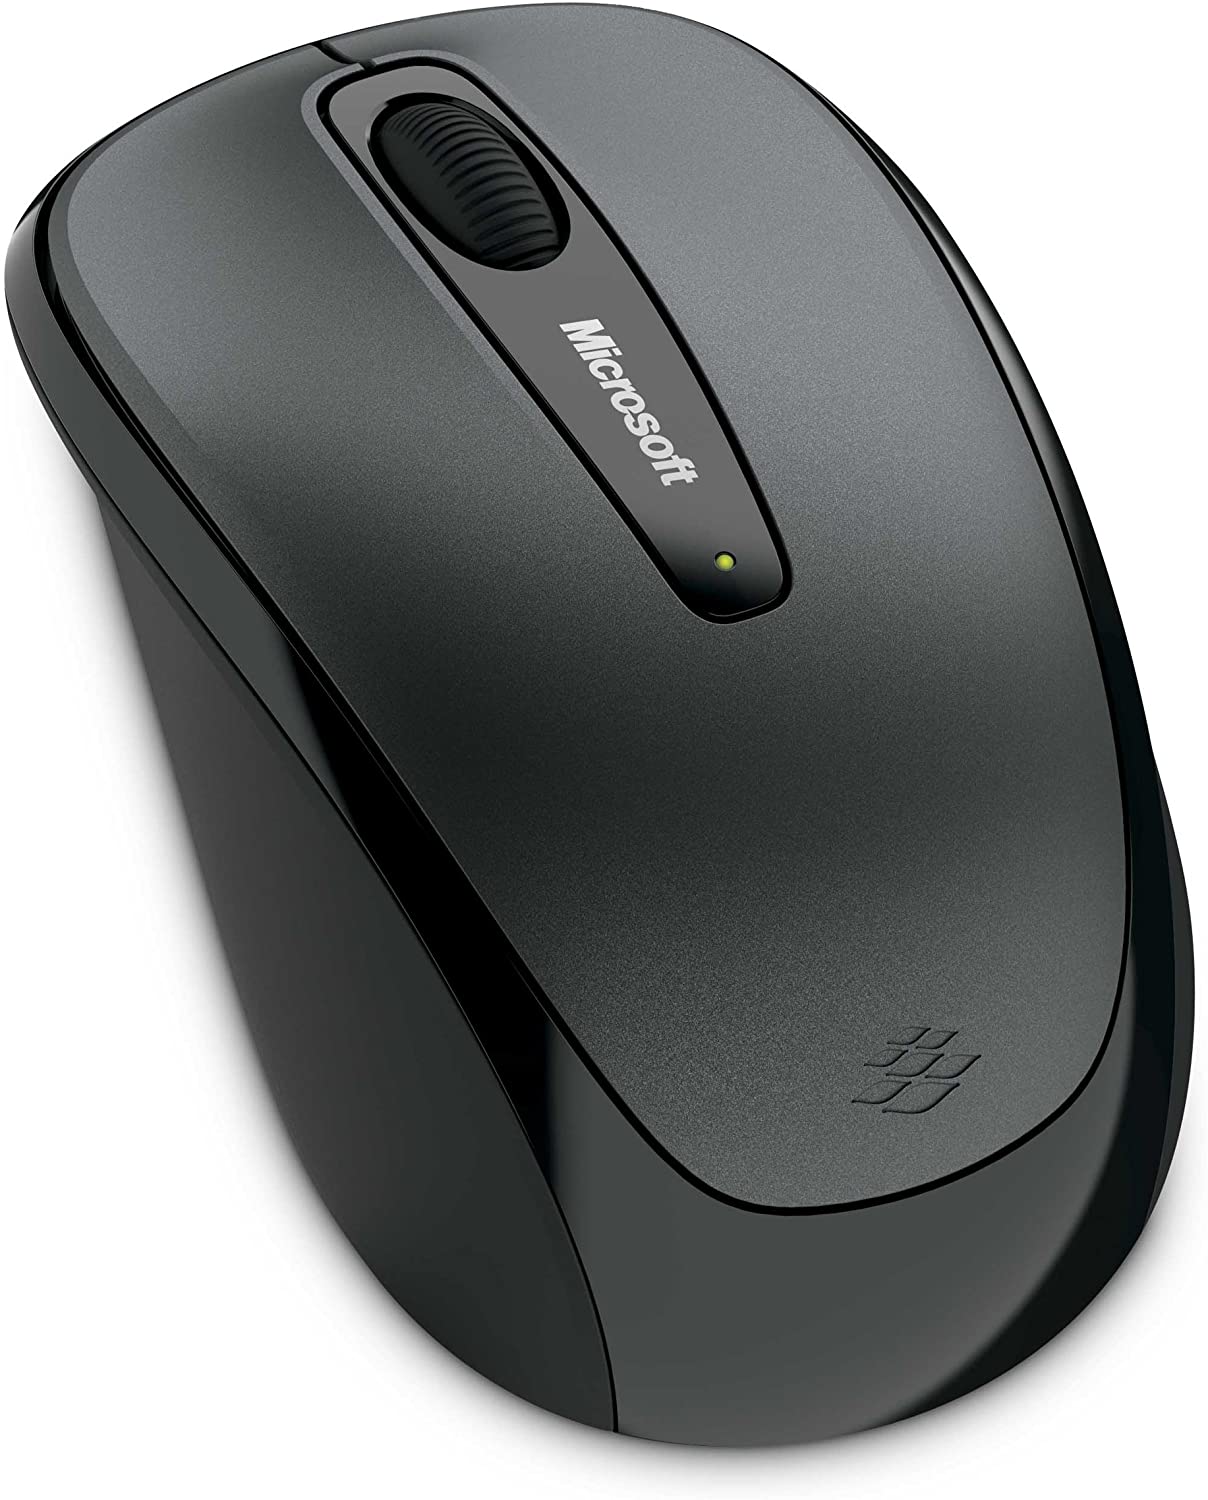 Microsoft Wireless Mobile Mouse 3500 - Loch Ness Gray, $9.99, free shipping for Prime